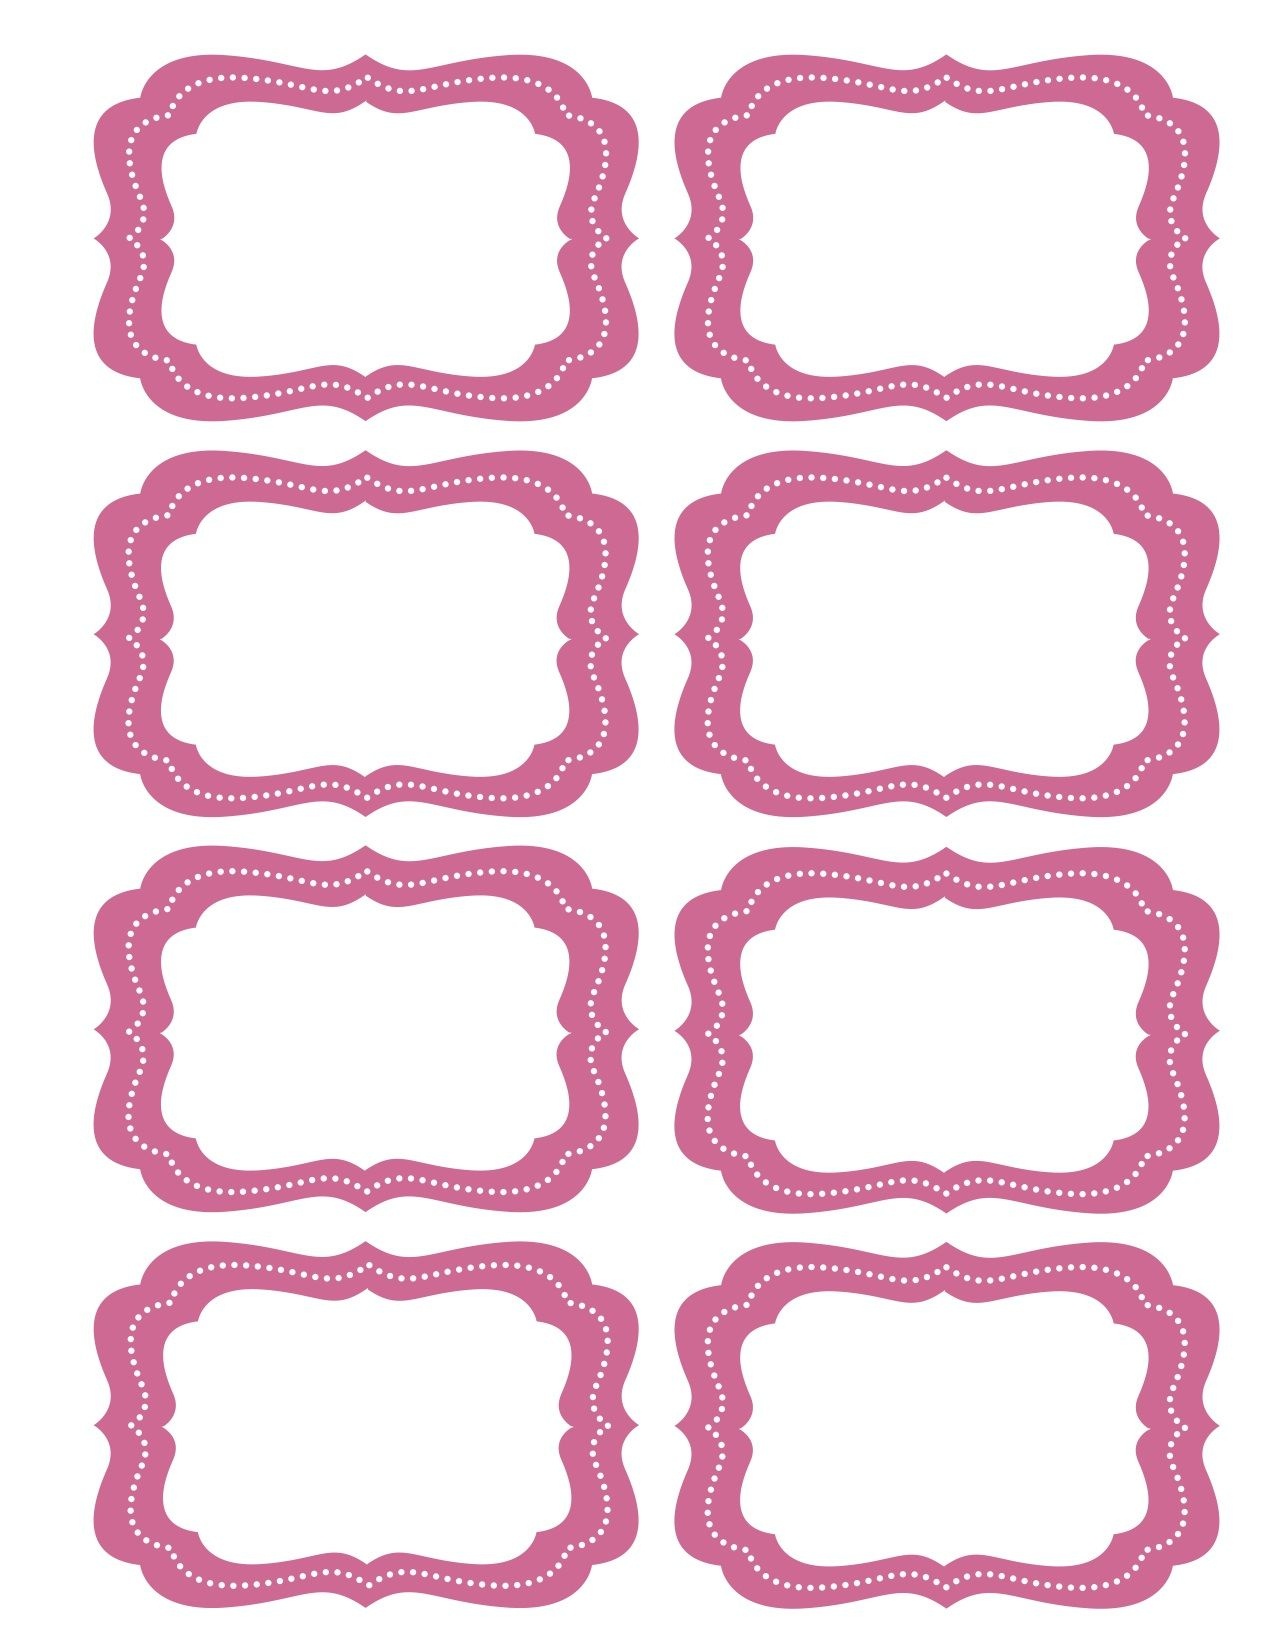 Free Printable Bag Label Templates | Candy Labels Blank Image - Free Printable Tags Templates